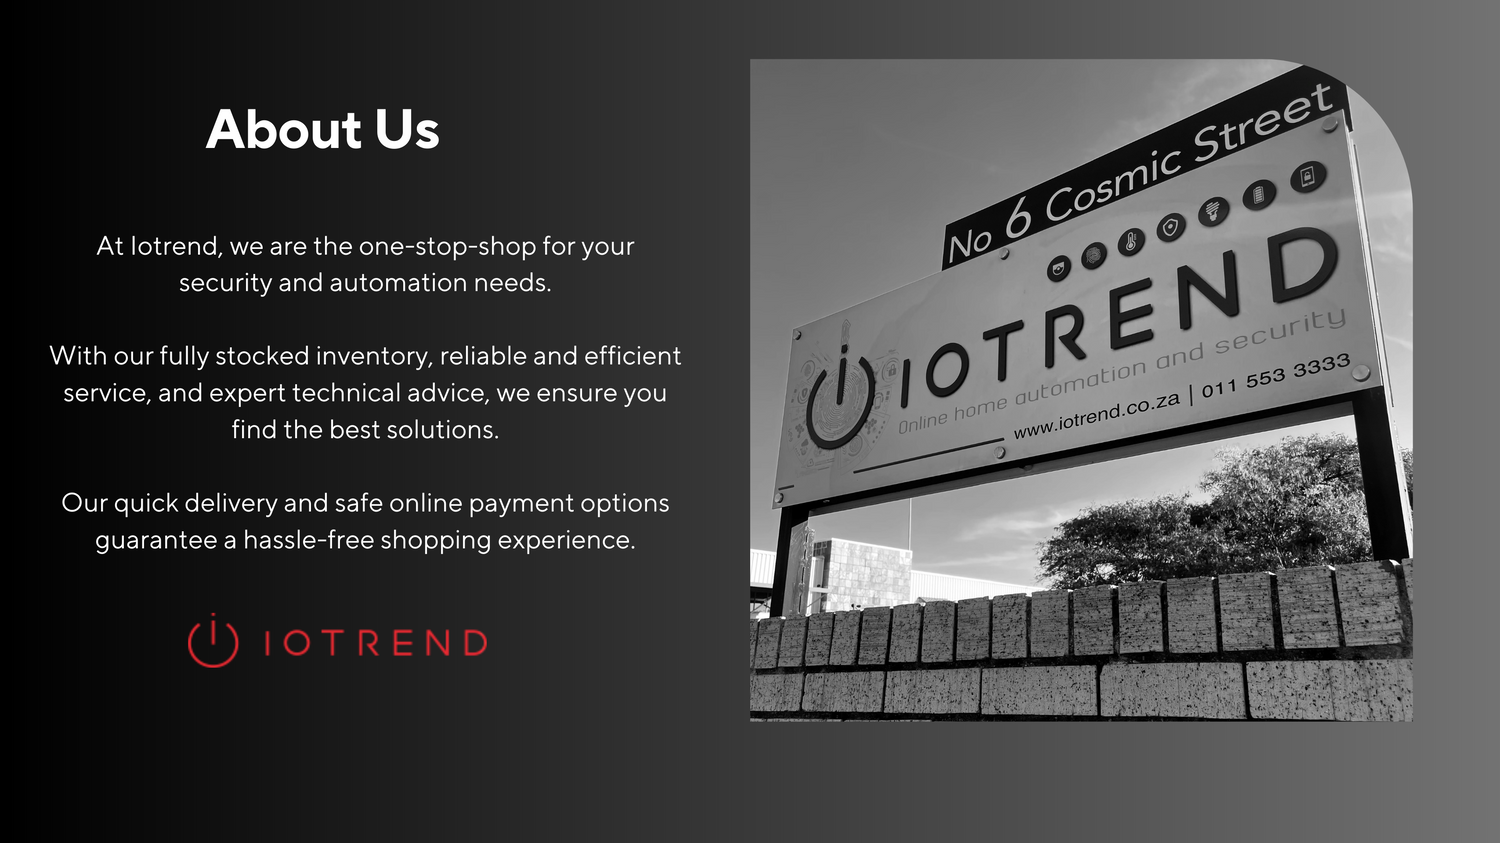 Iotrend, we are the one stop shop for your security and automation needs